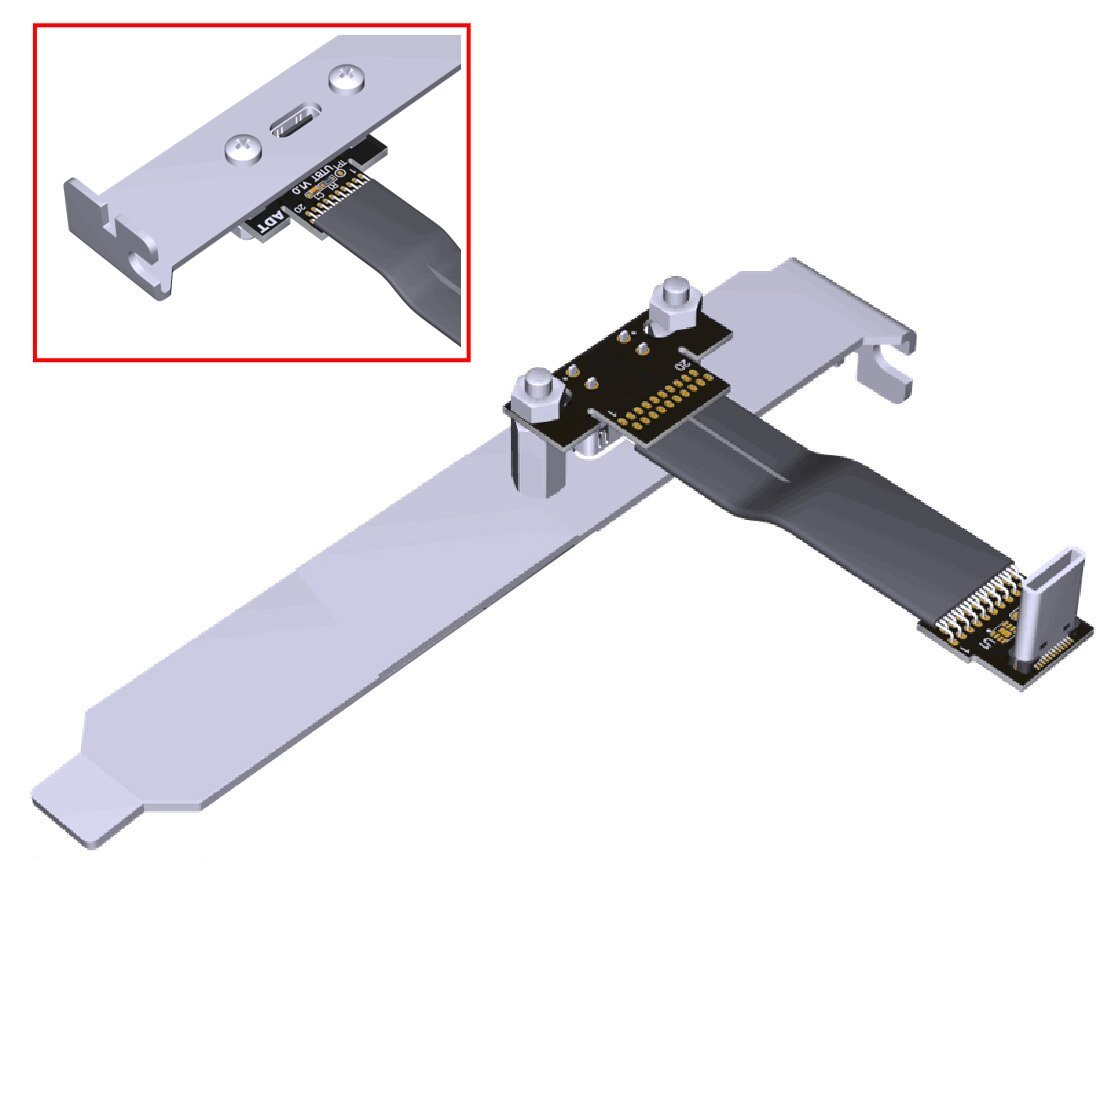 8in. USB 3.2 Gen 2 Type-C Male to Female High Quality Panel Mount